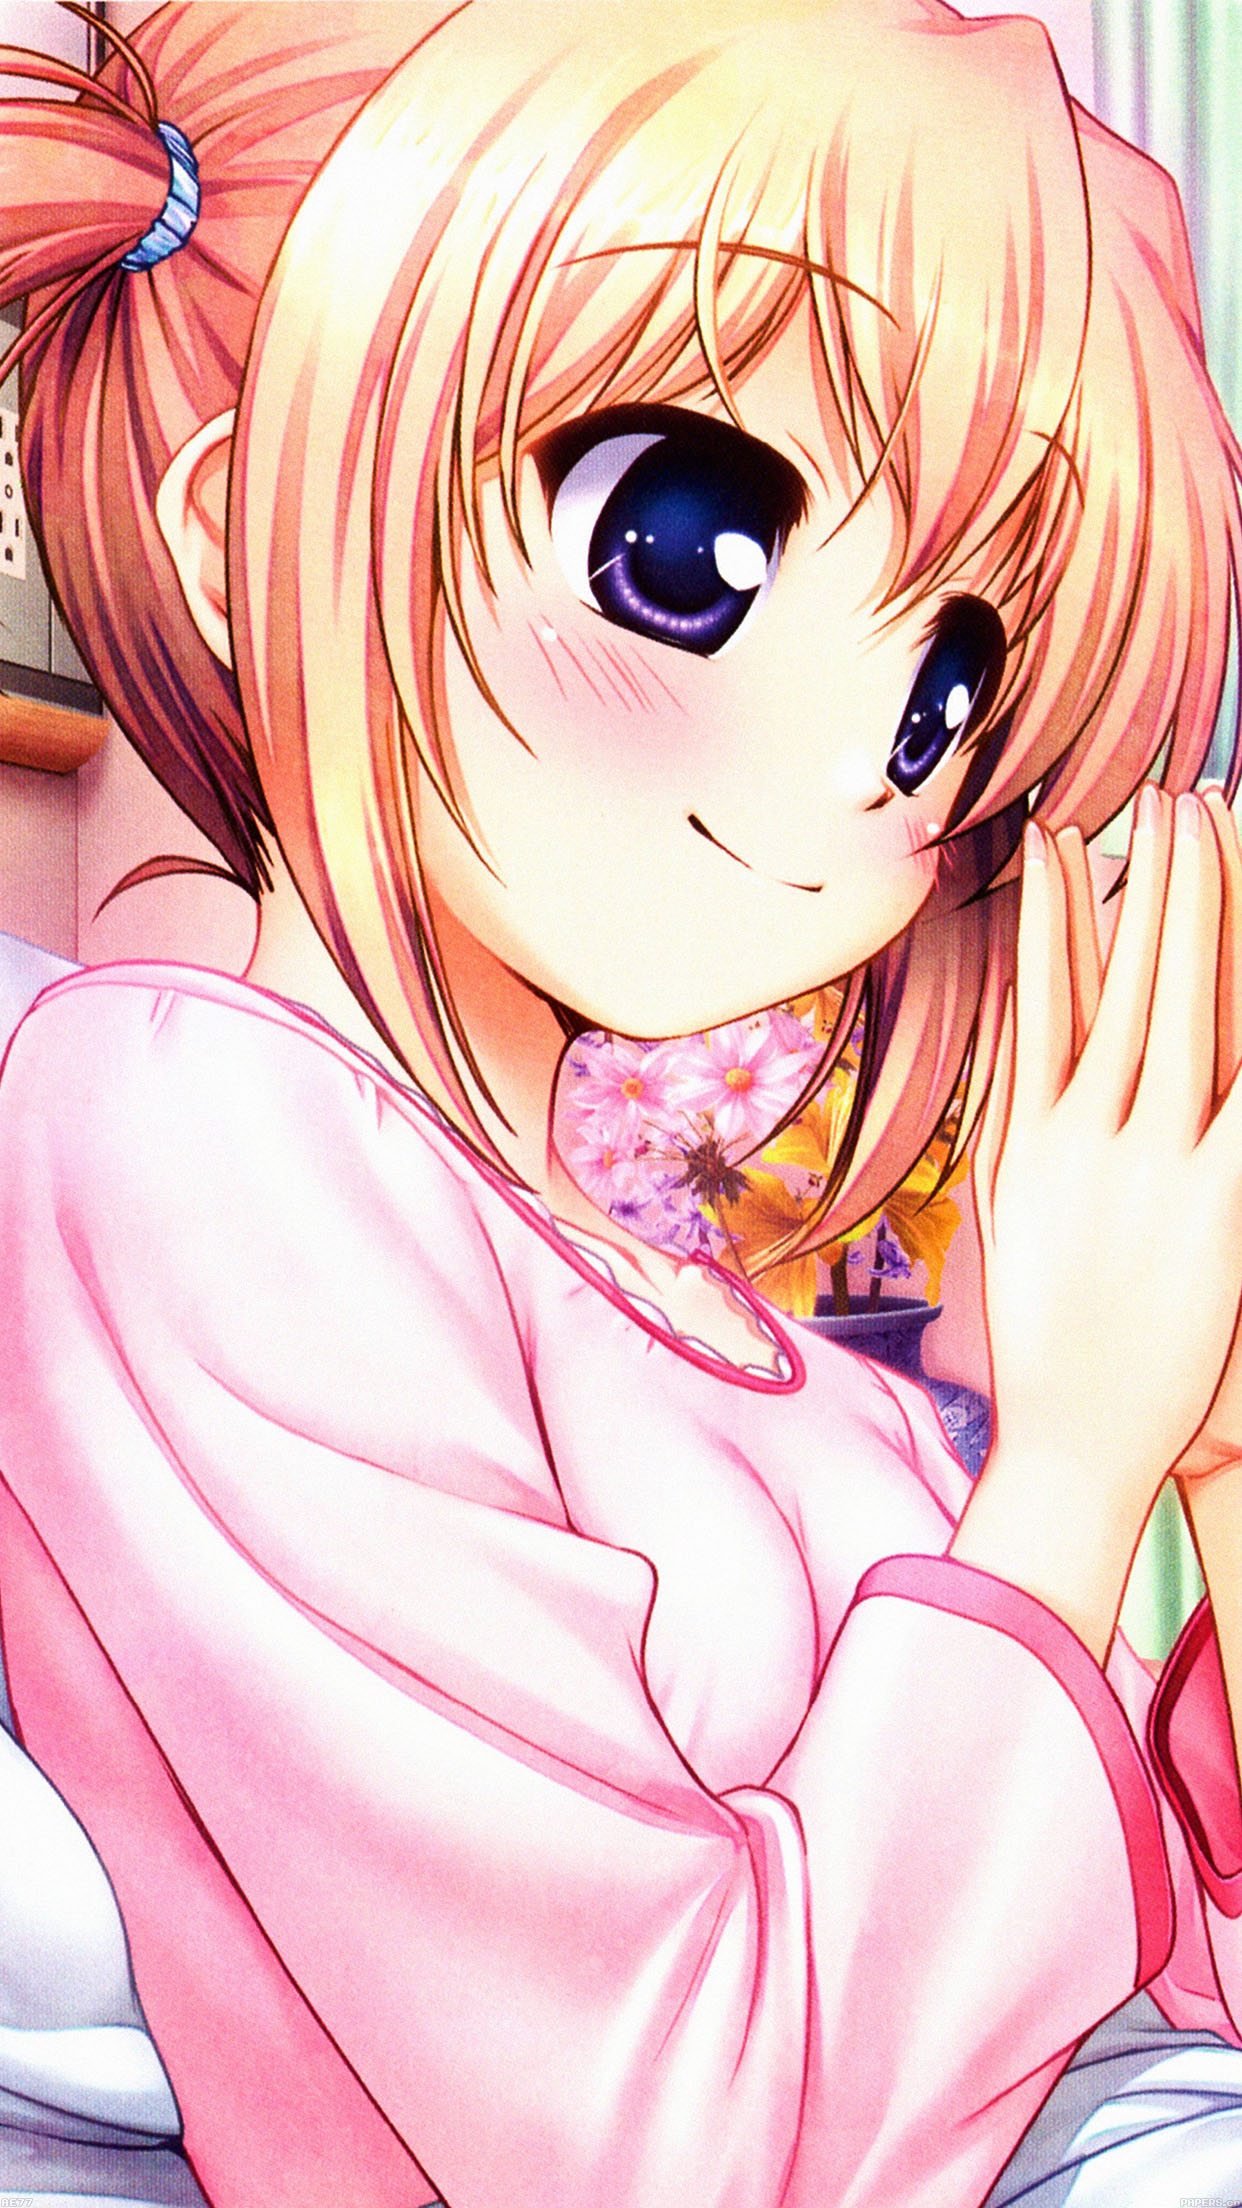 Anime Girl In Bed Smile Android wallpaper